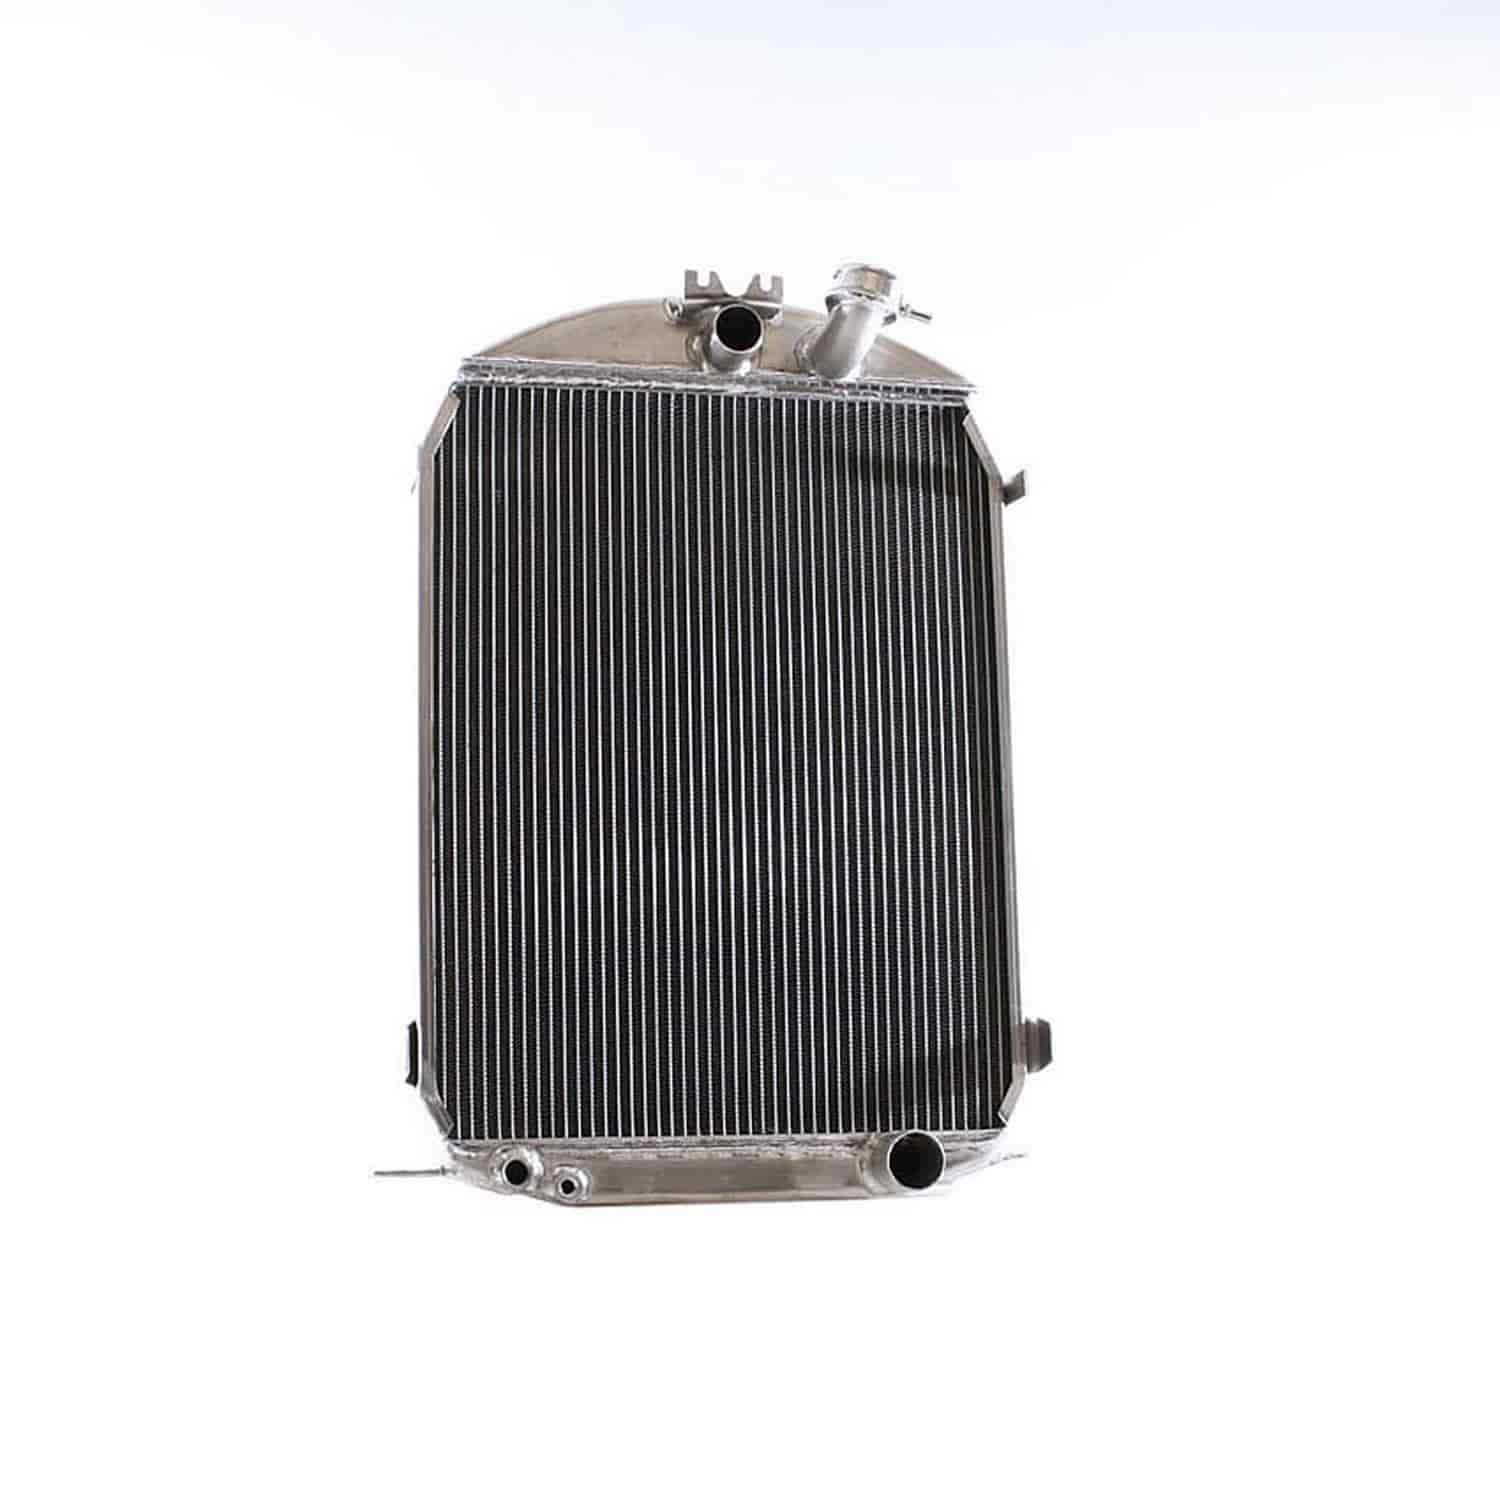 ExactFit Radiator for 1930-1931 Model A with Early GM Engine and Hood Rod Bracket